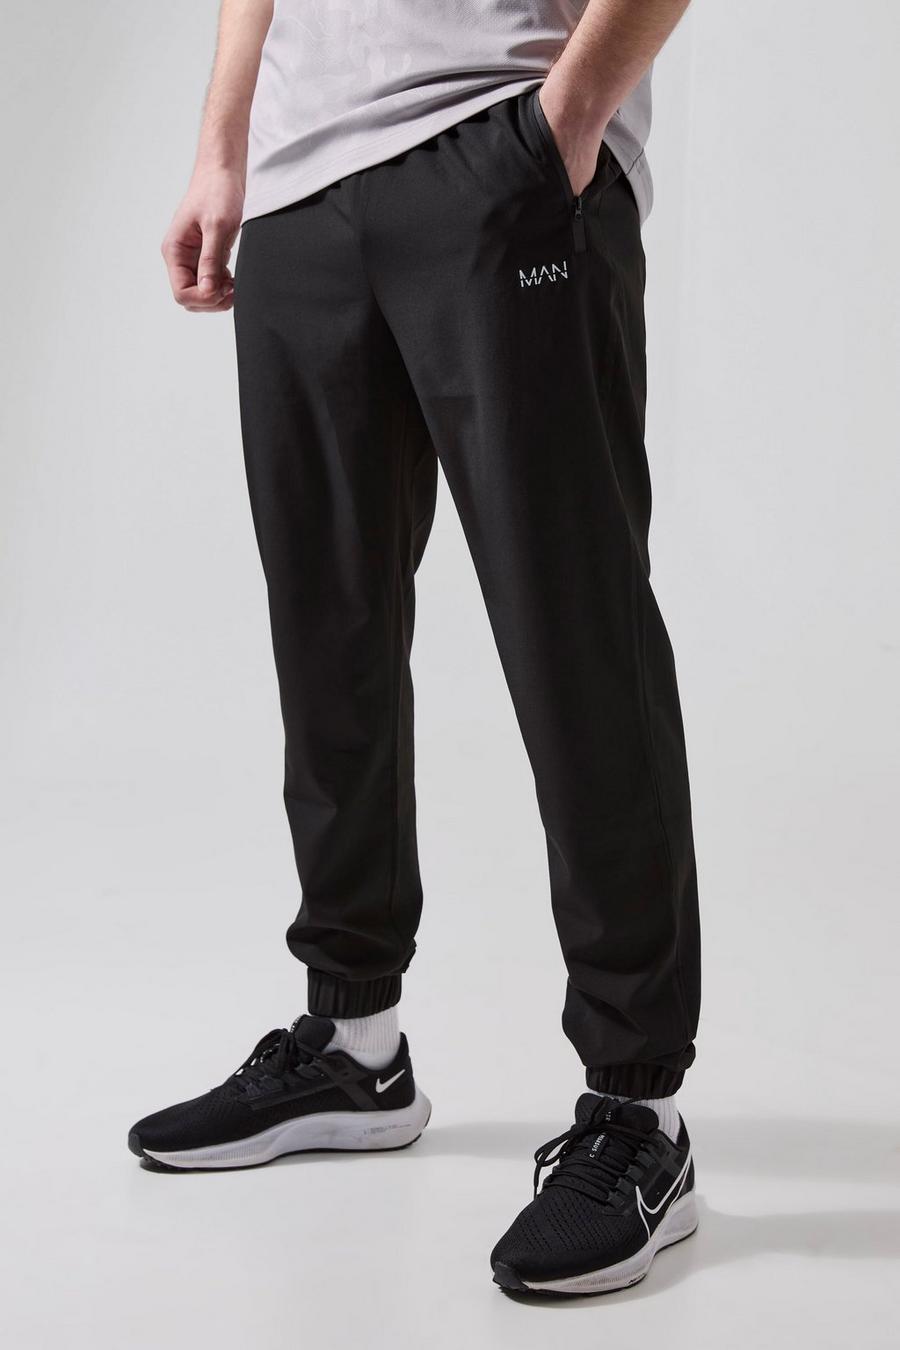 Black Tall Man Active Gym Tapered Sweatpant